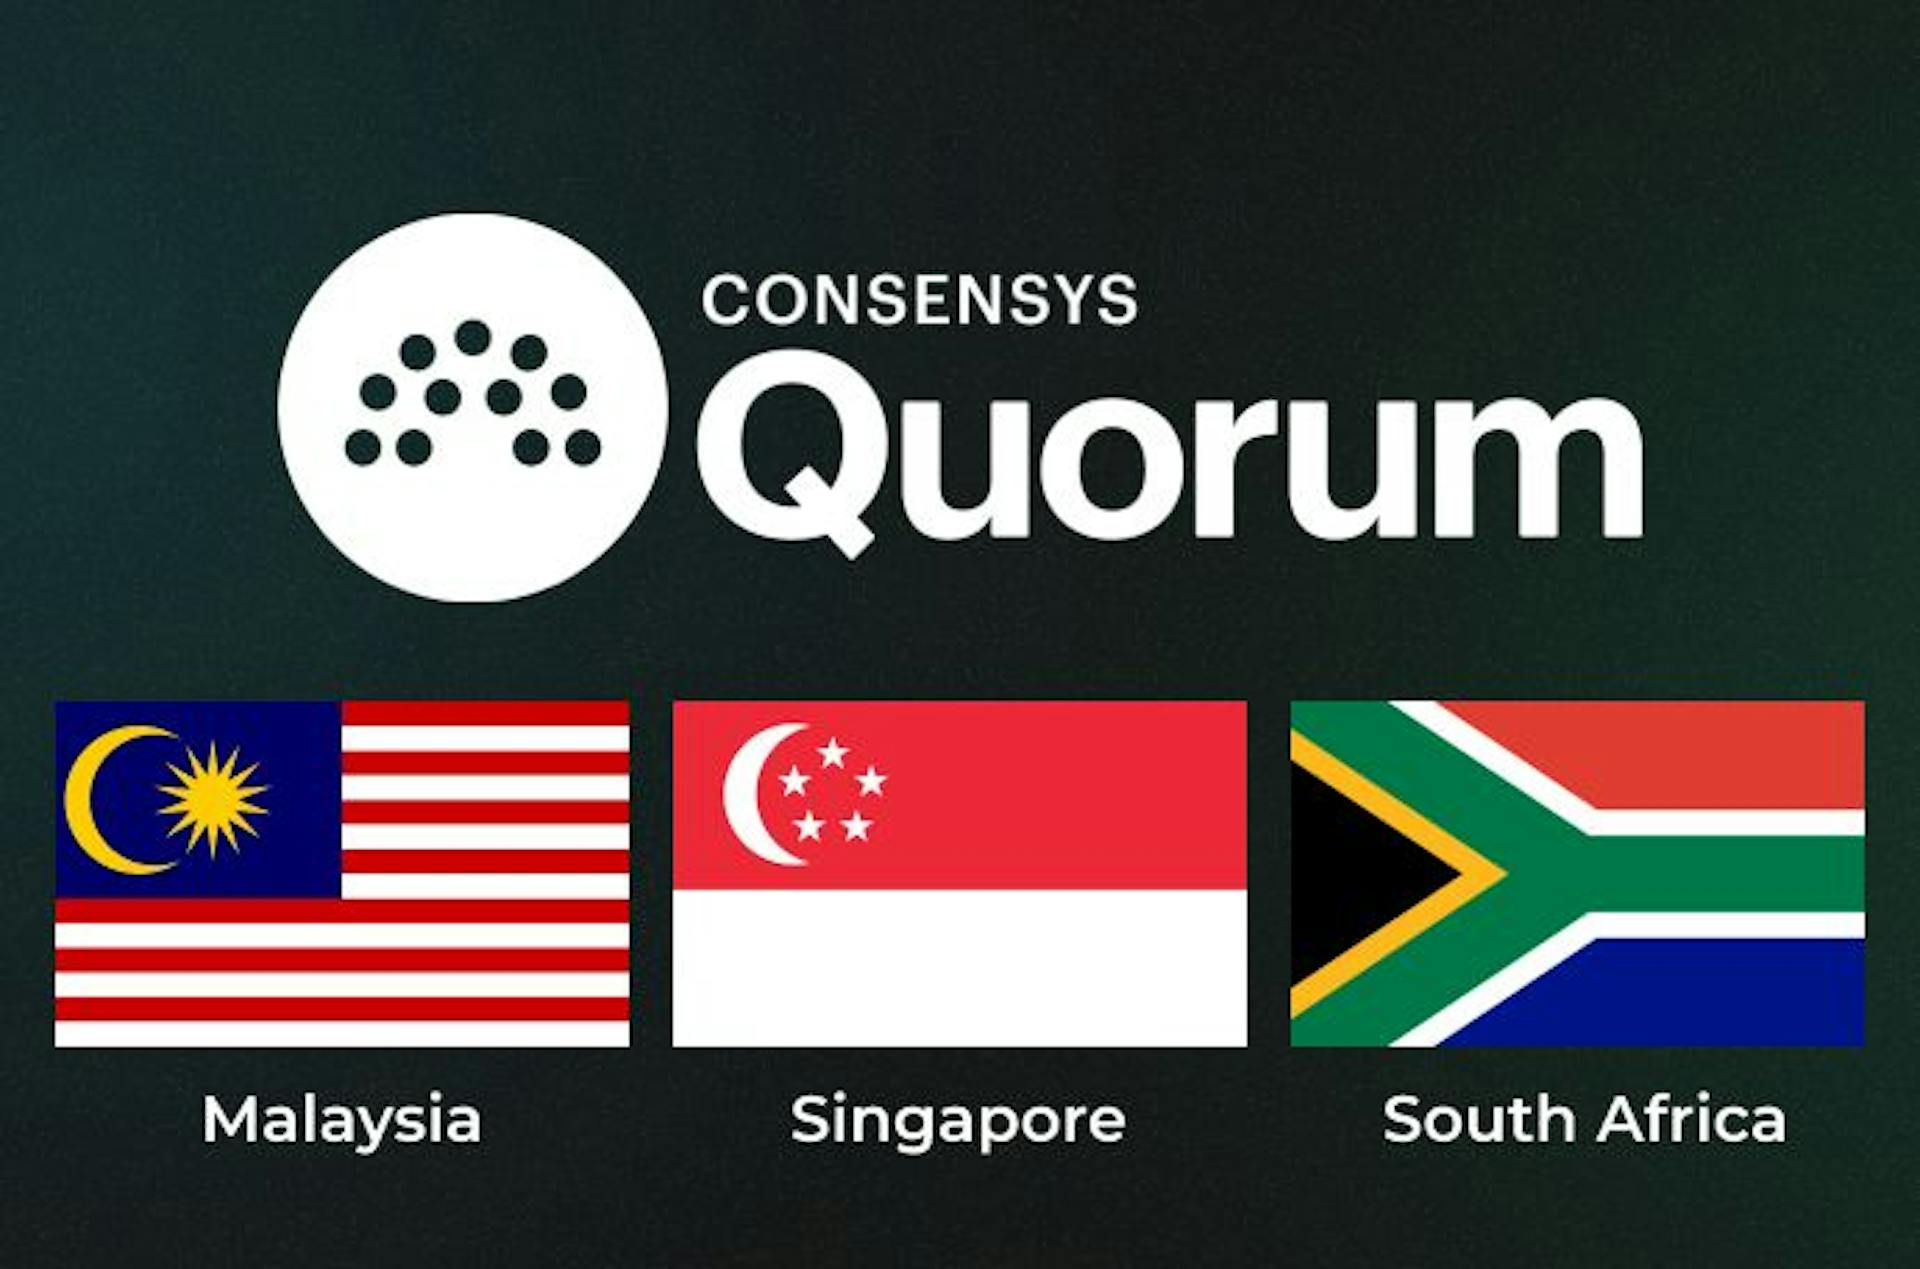 Some countries that use Quorum to implement CBDC